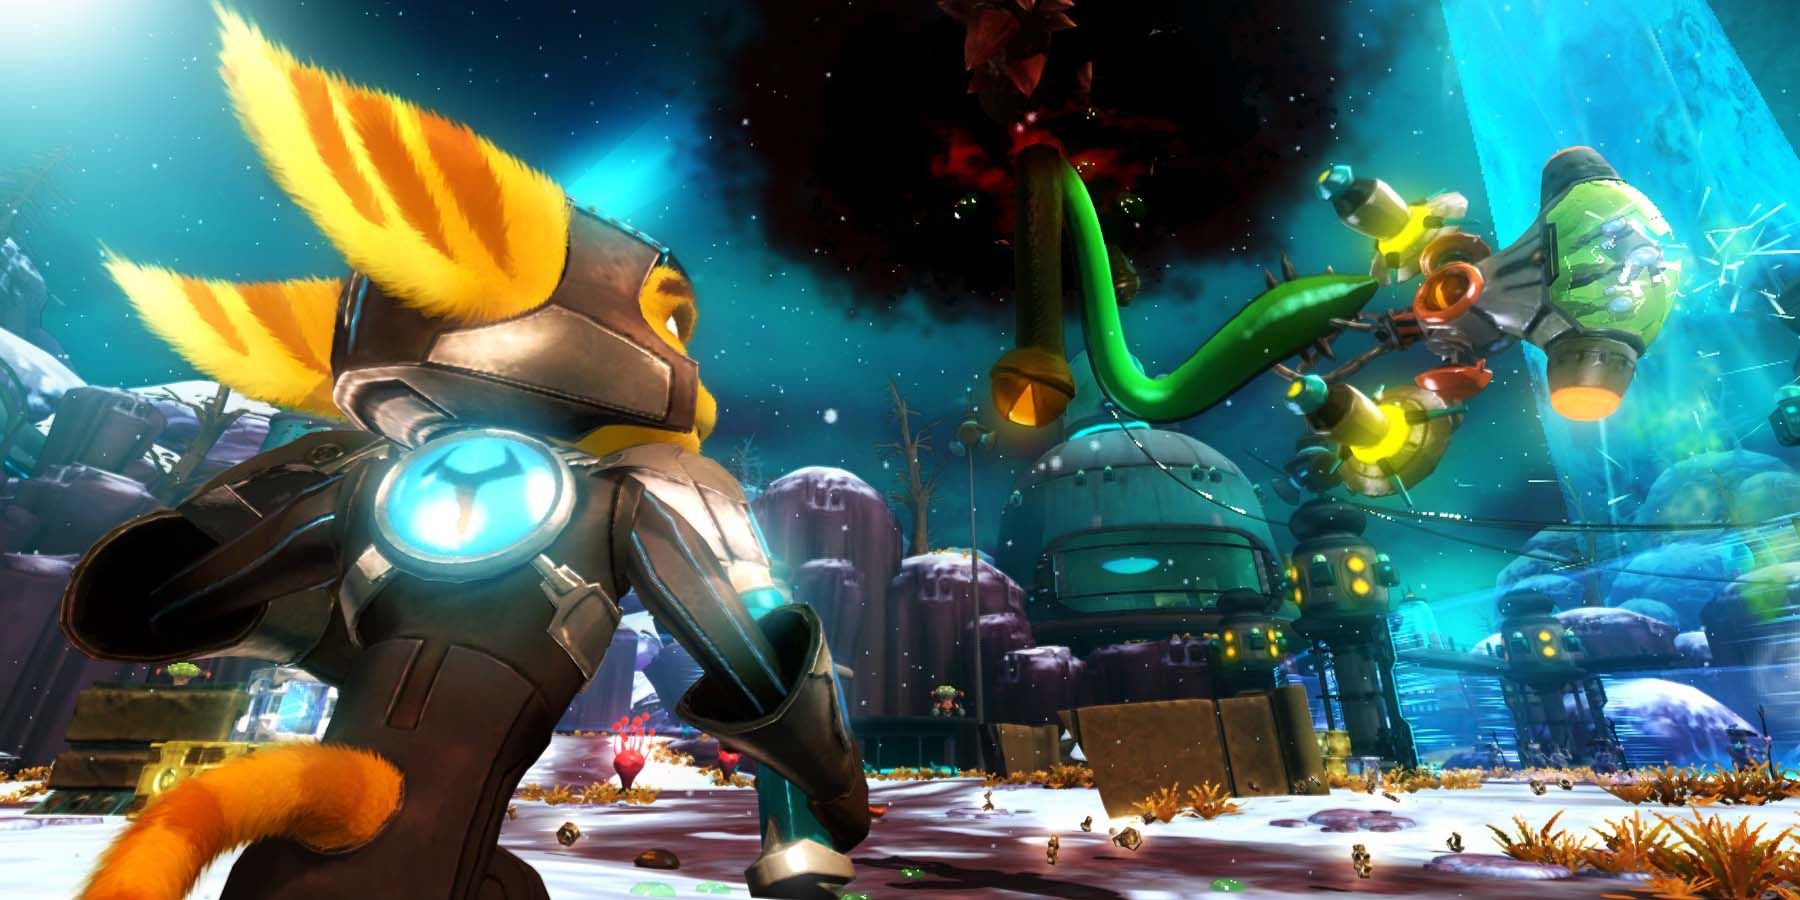 Ratchet & Clank A Crack in Time gameplay